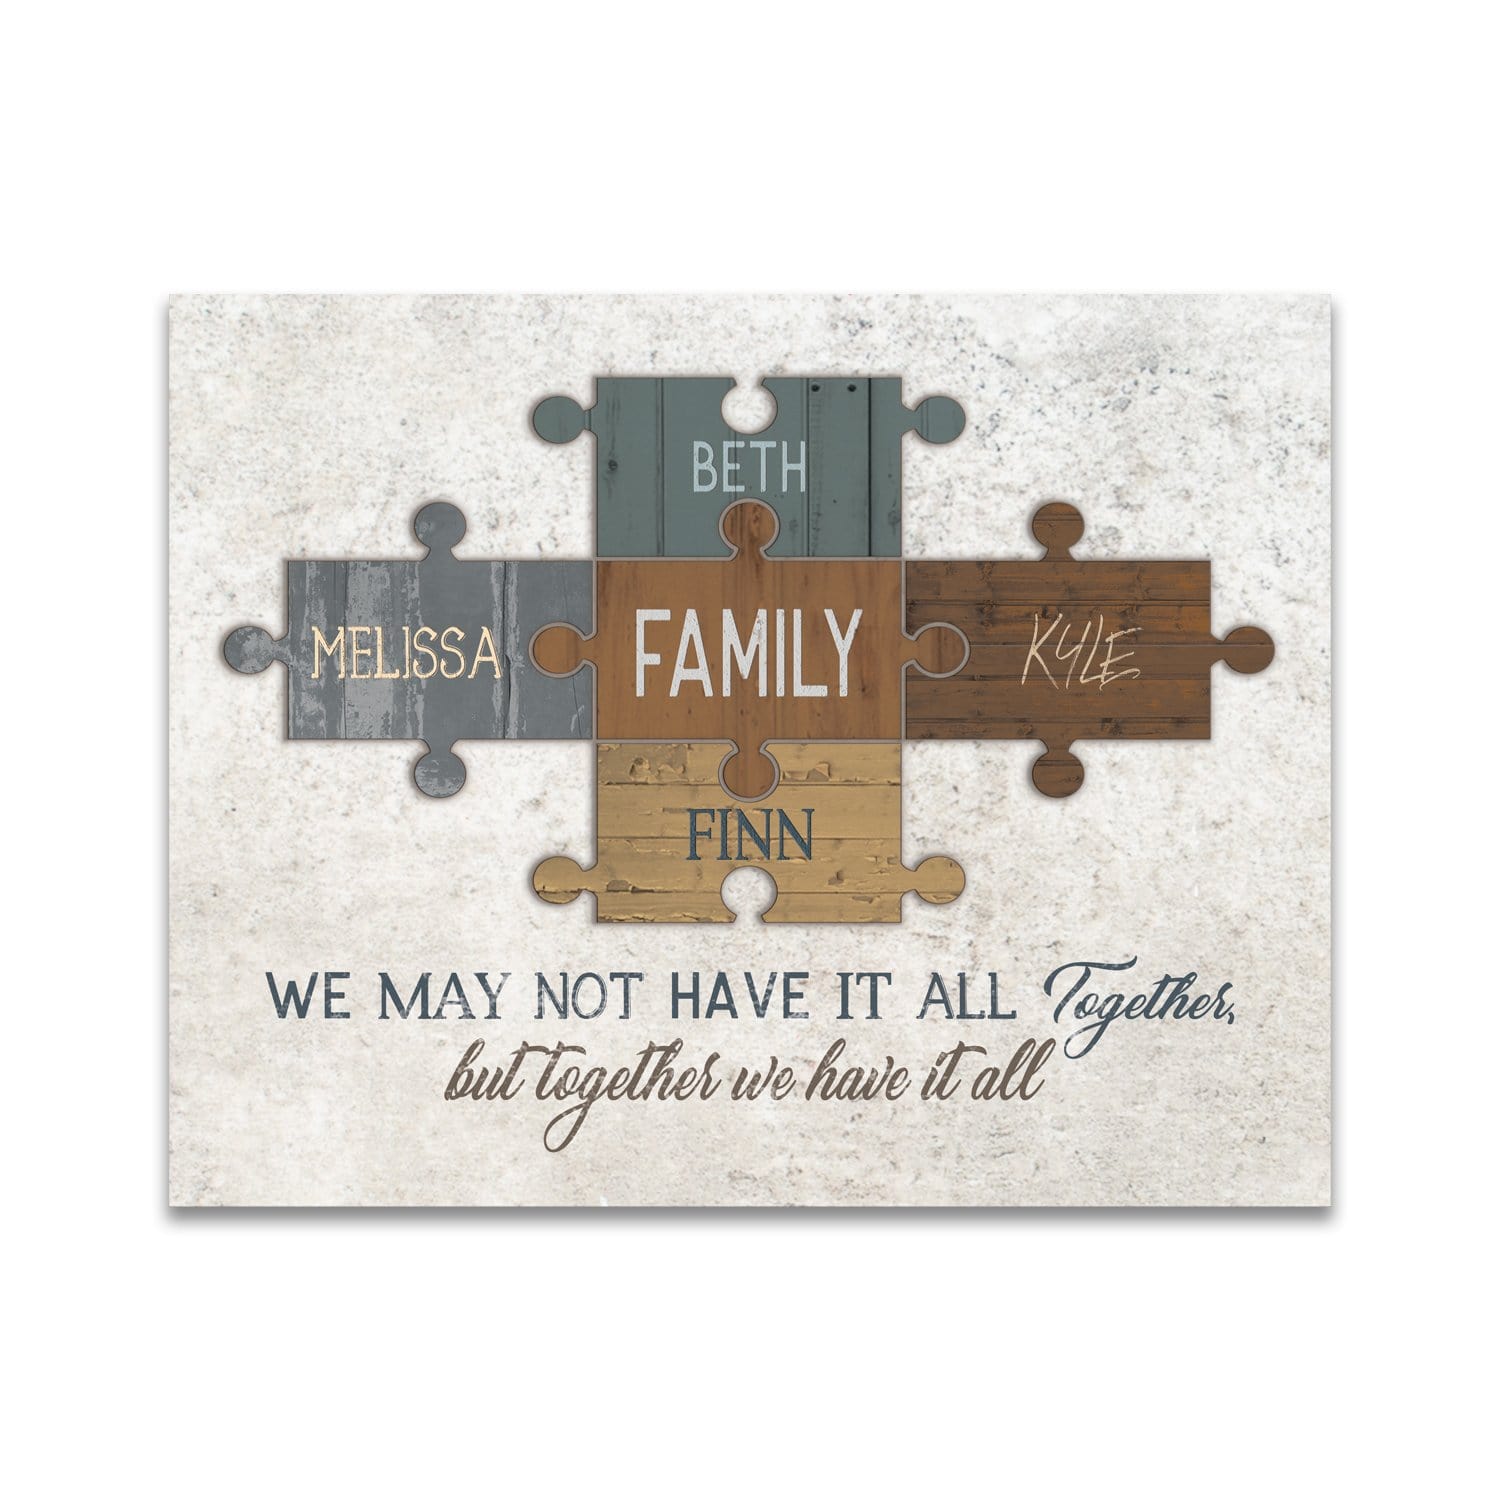 Family puzzle piece art - Personalized Puzzle Gift